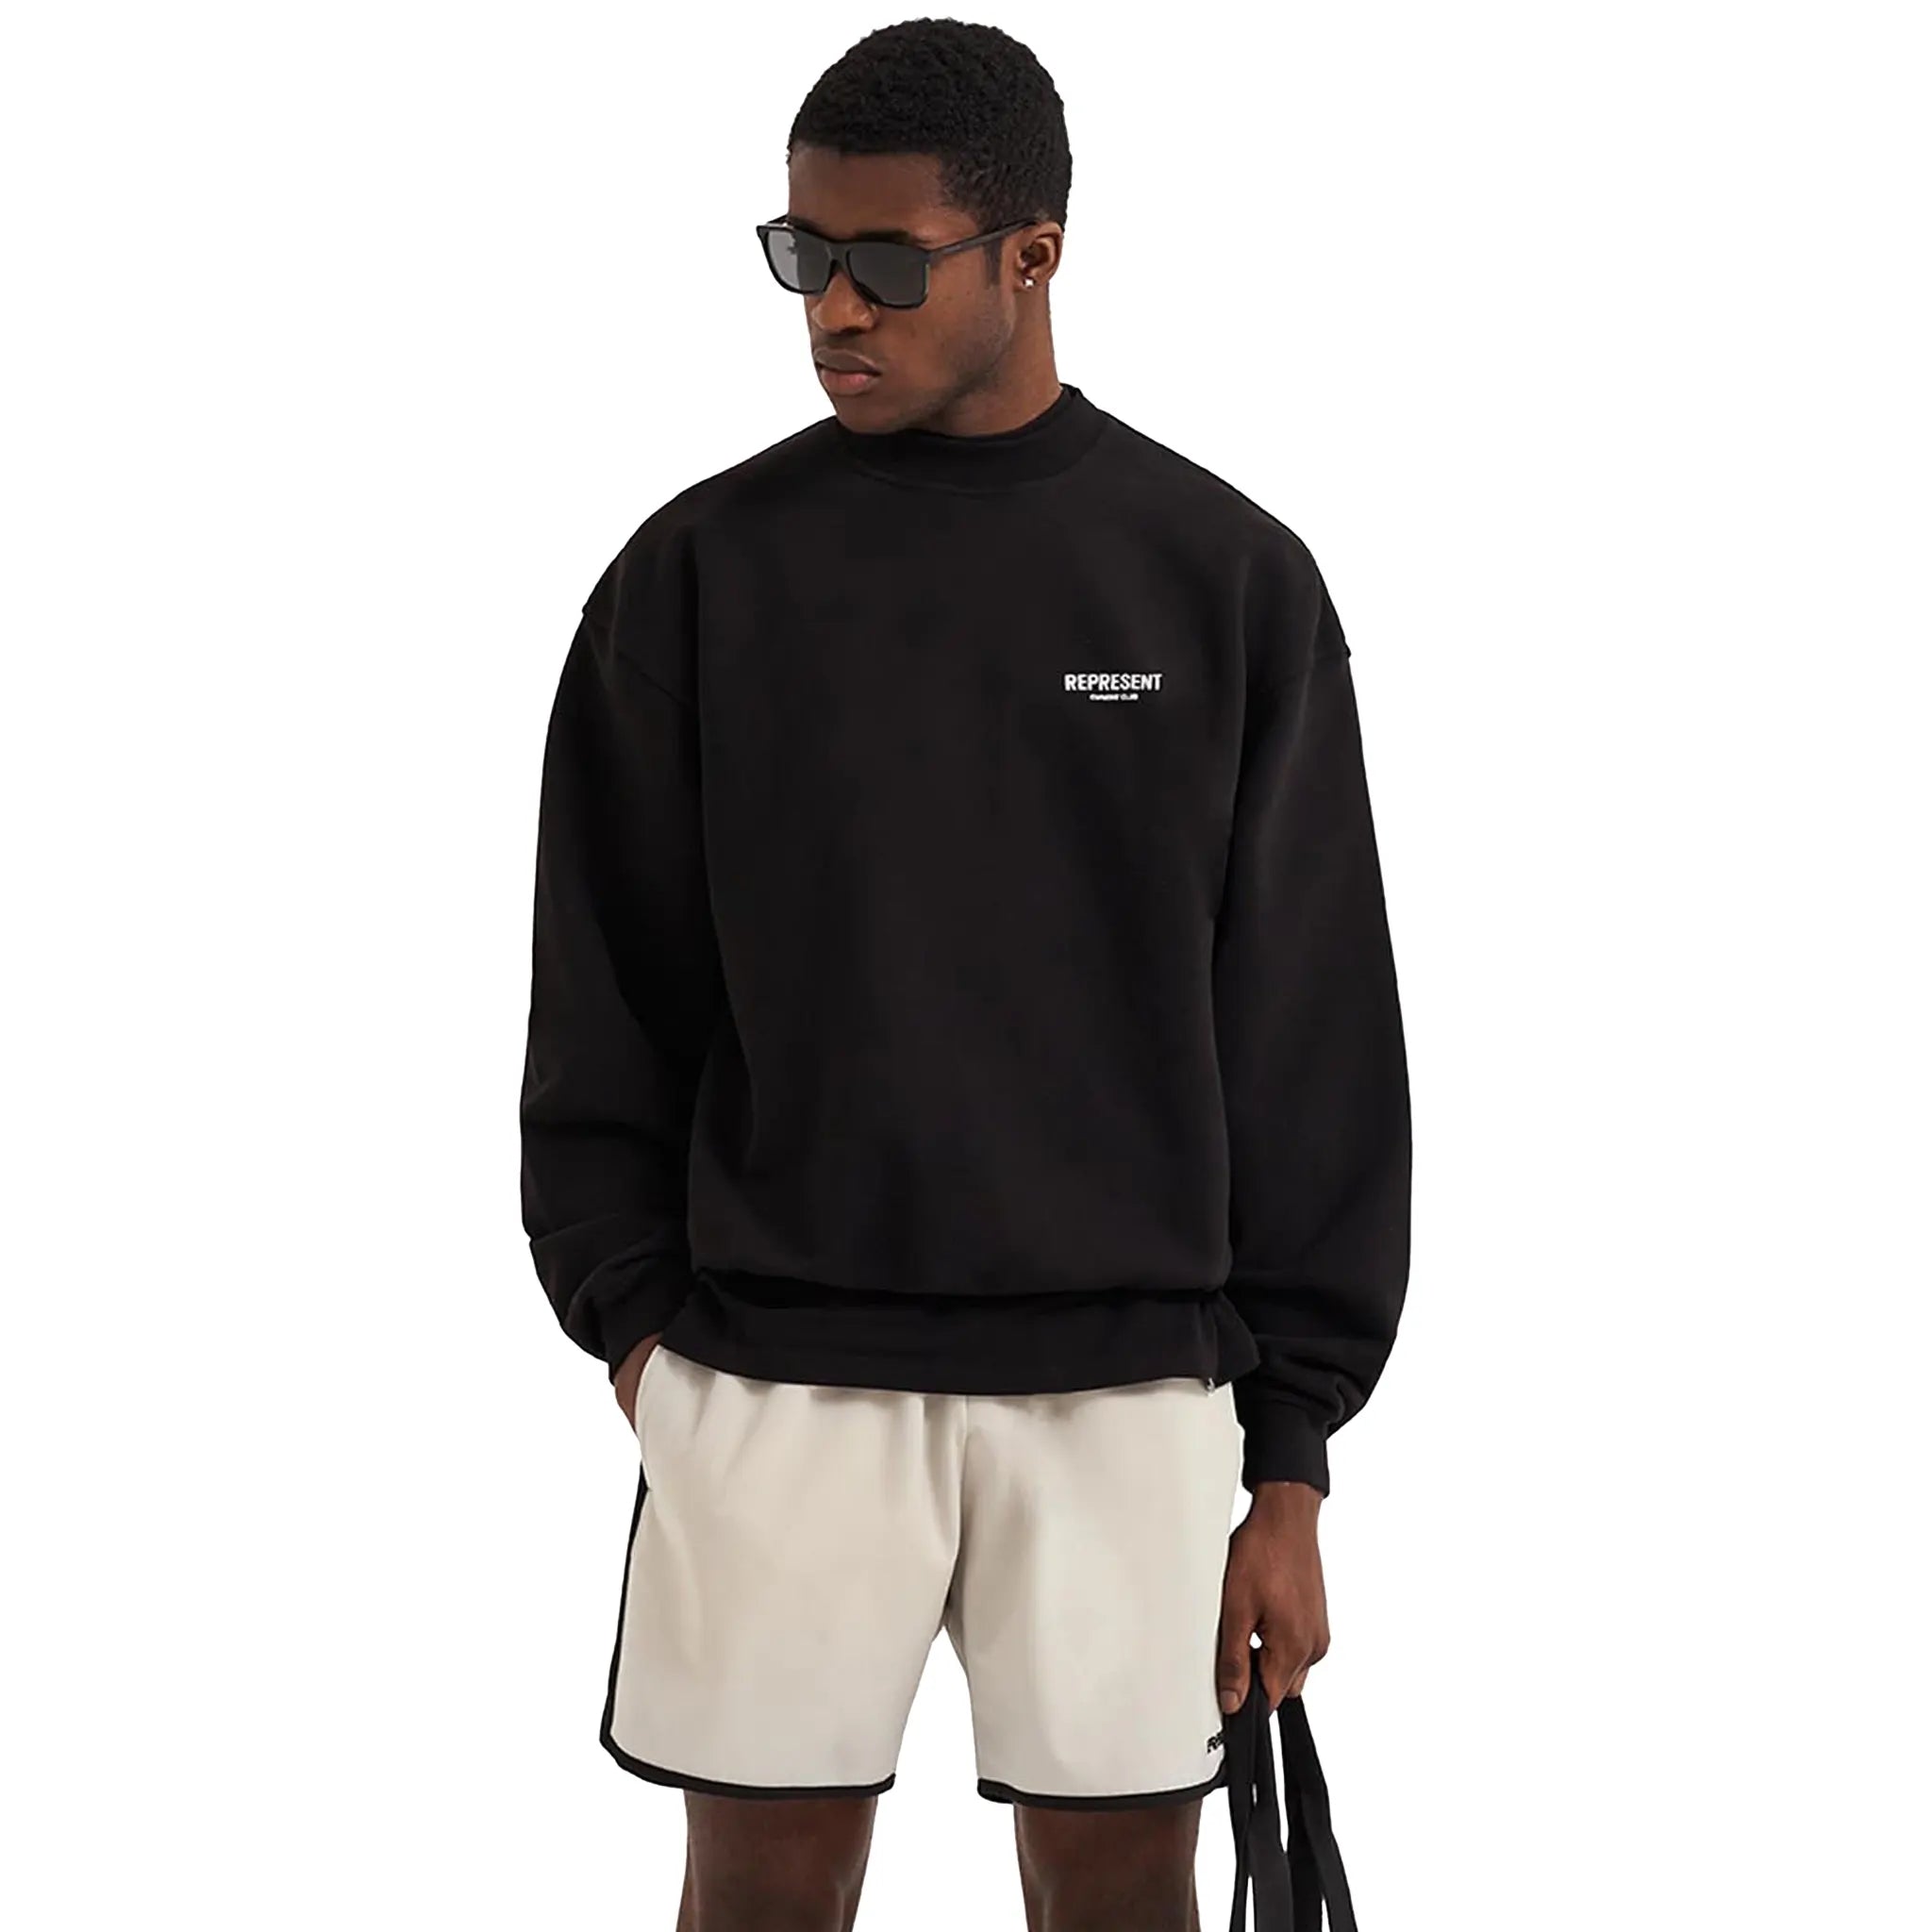 Model Front view of Represent Owners Club Black Sweatshirt M04159-01